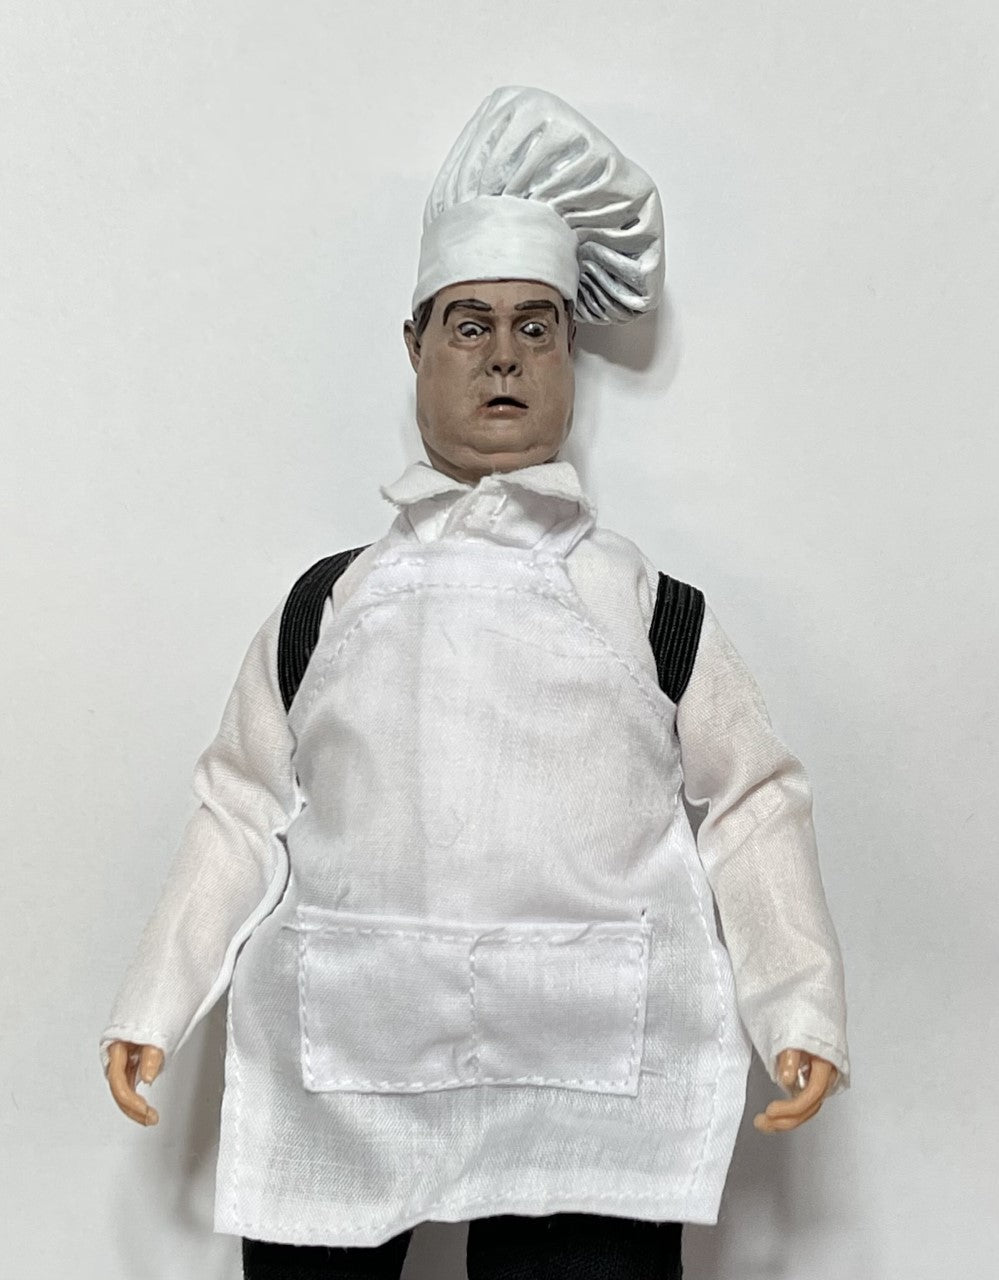 Brentz Dolz The Honeymooners “Chef Of The Future” 8" Action Figures 2-Pack